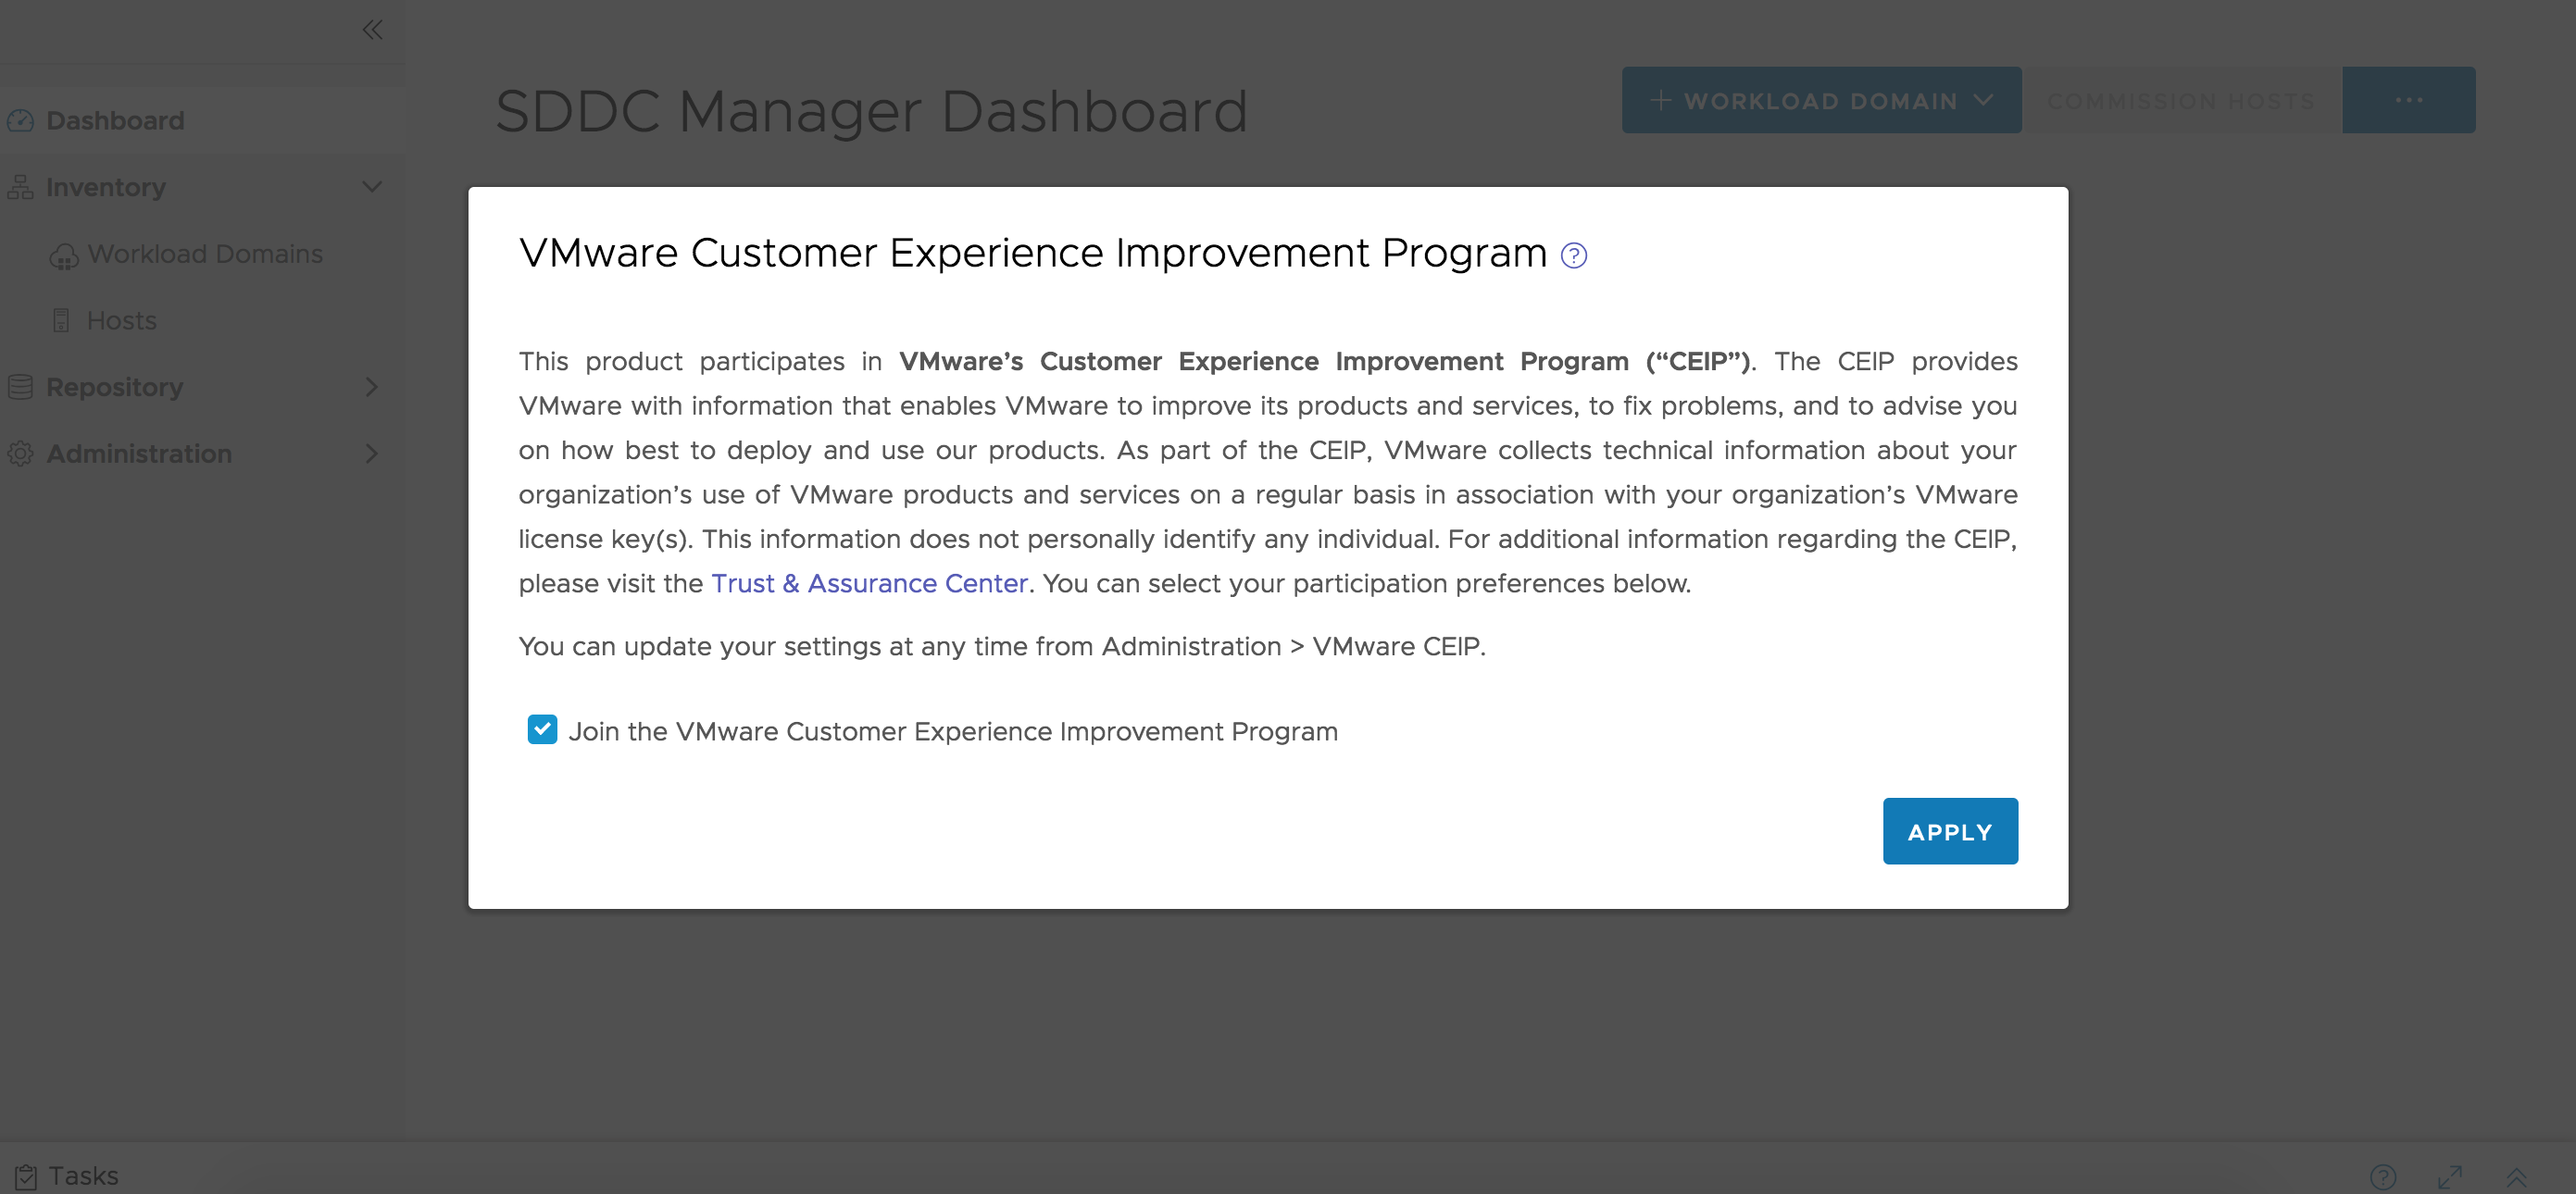 An image of the VMware Customer Experience Improvement Program (CEIP) pop-up window. You can choose to join CEIP or not.